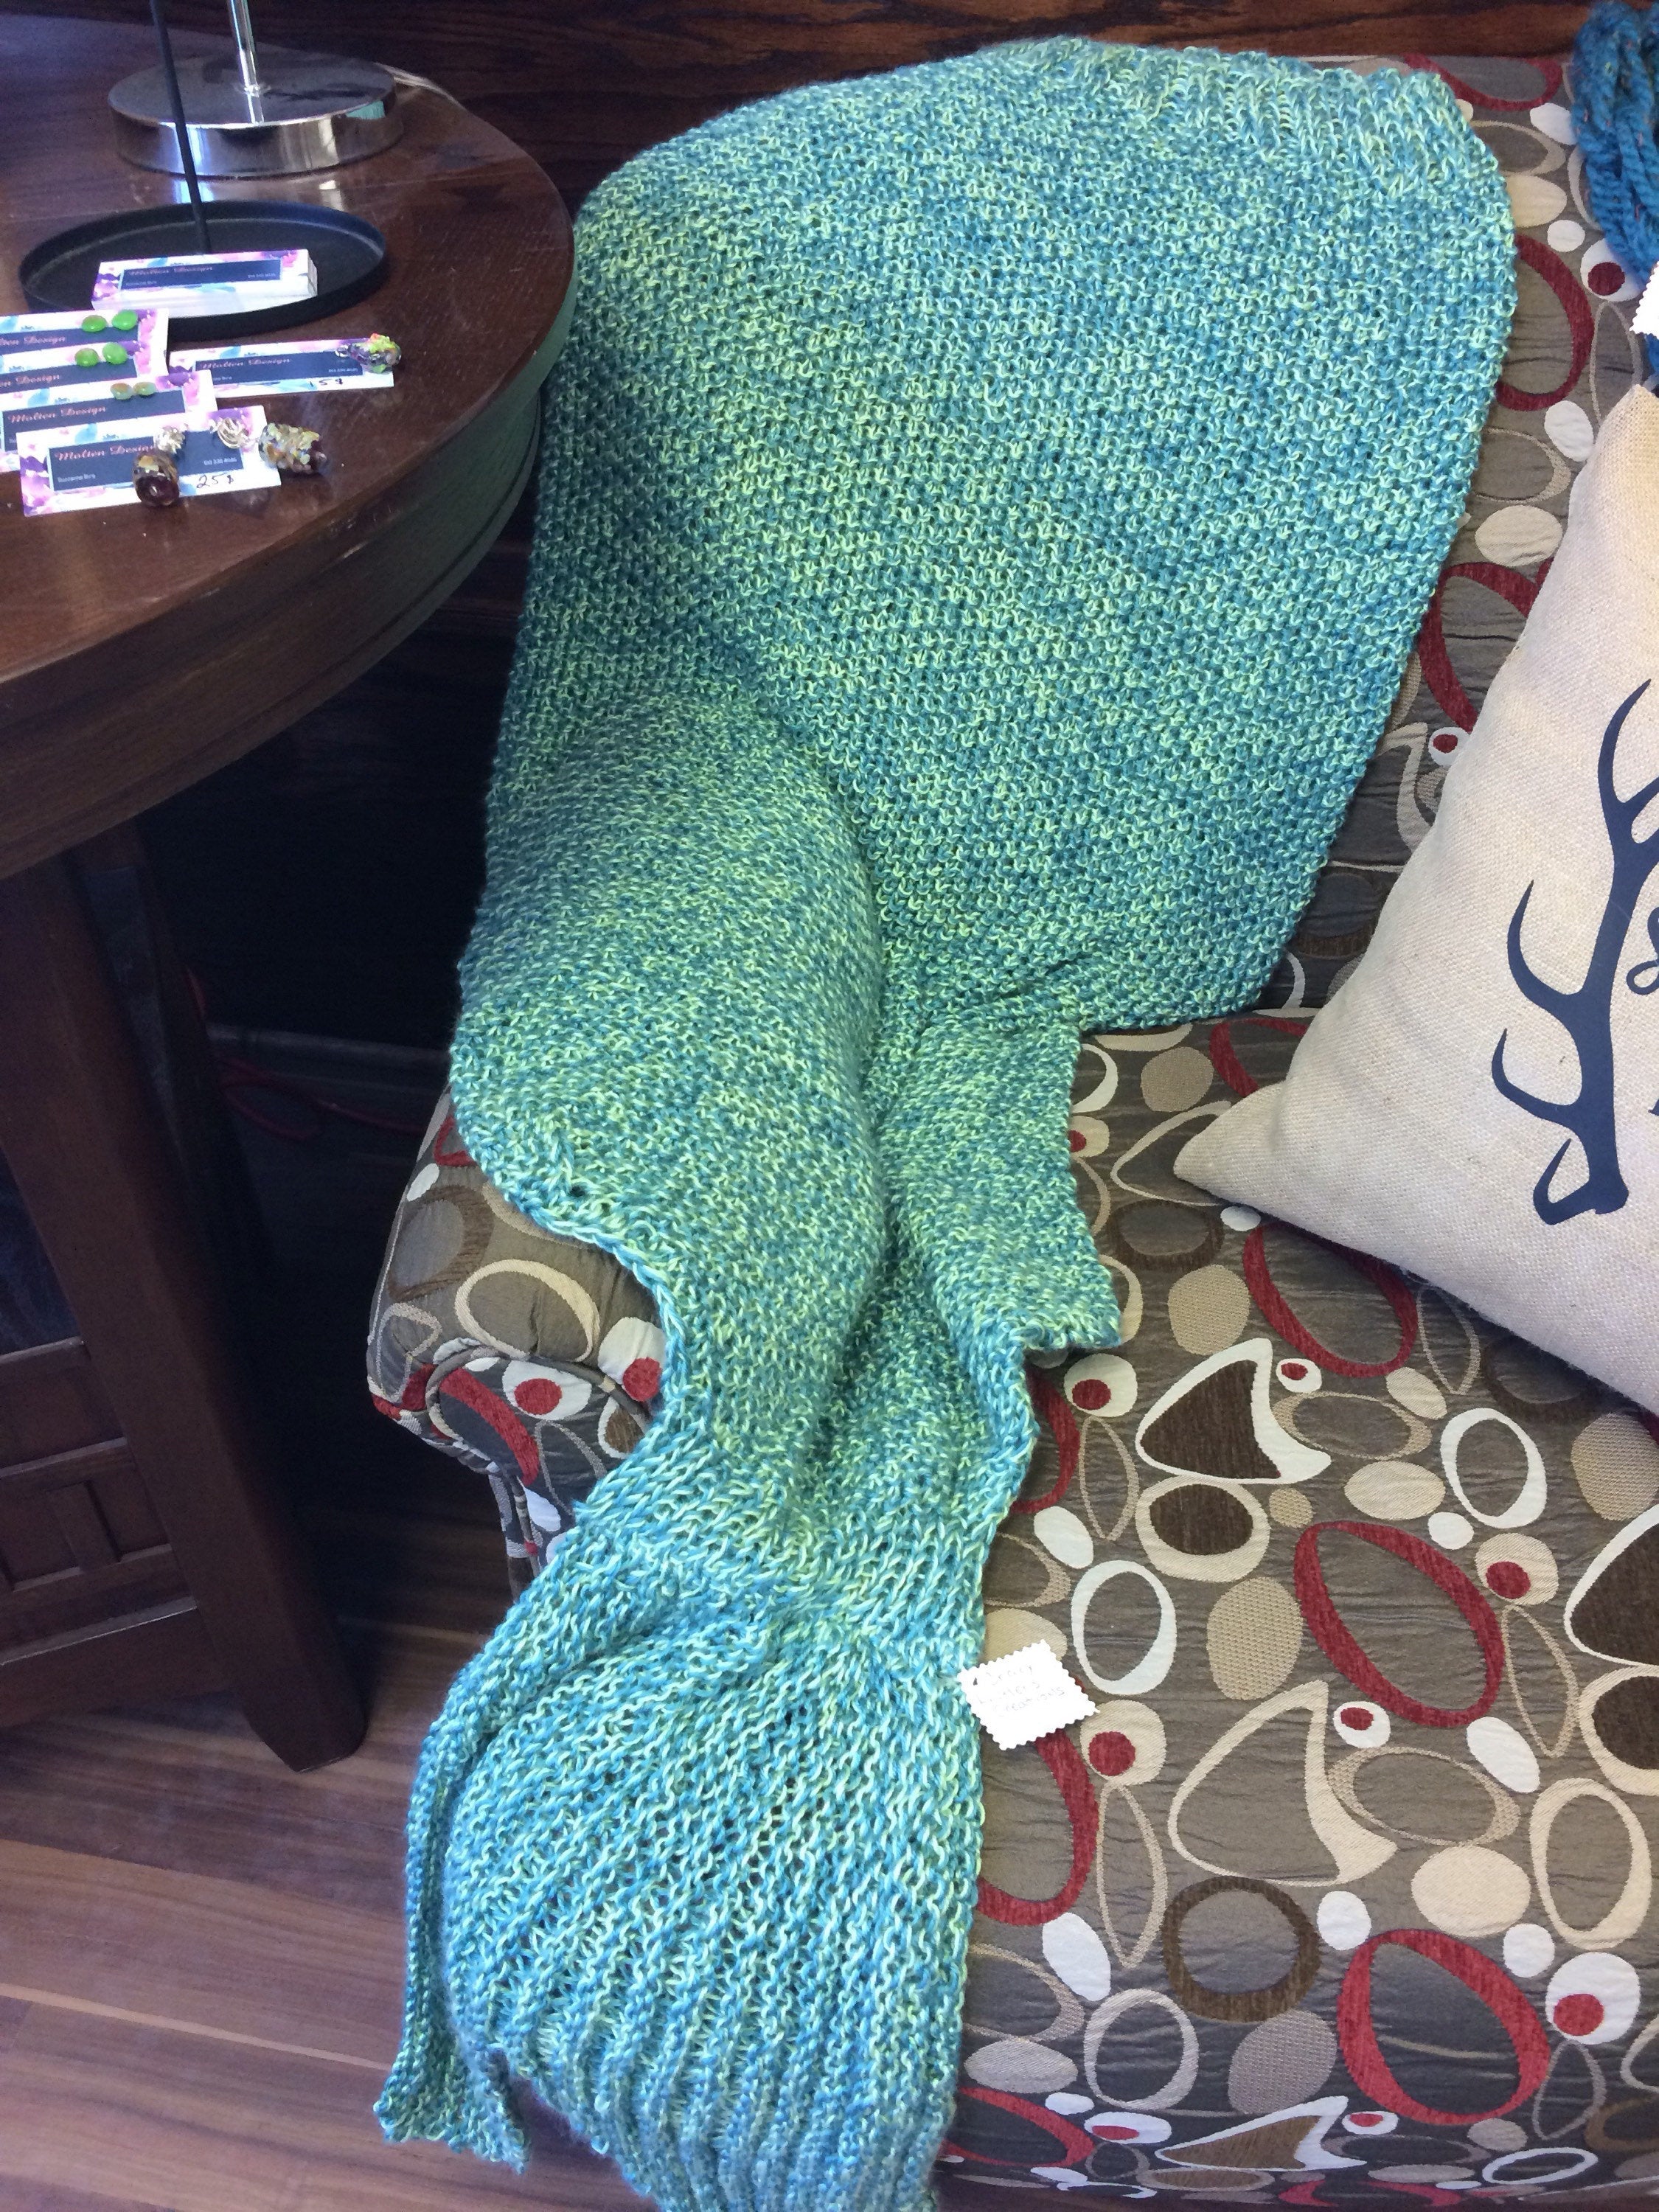 Hand Knit Knitted ‘Mermaid Tail’ Blanket